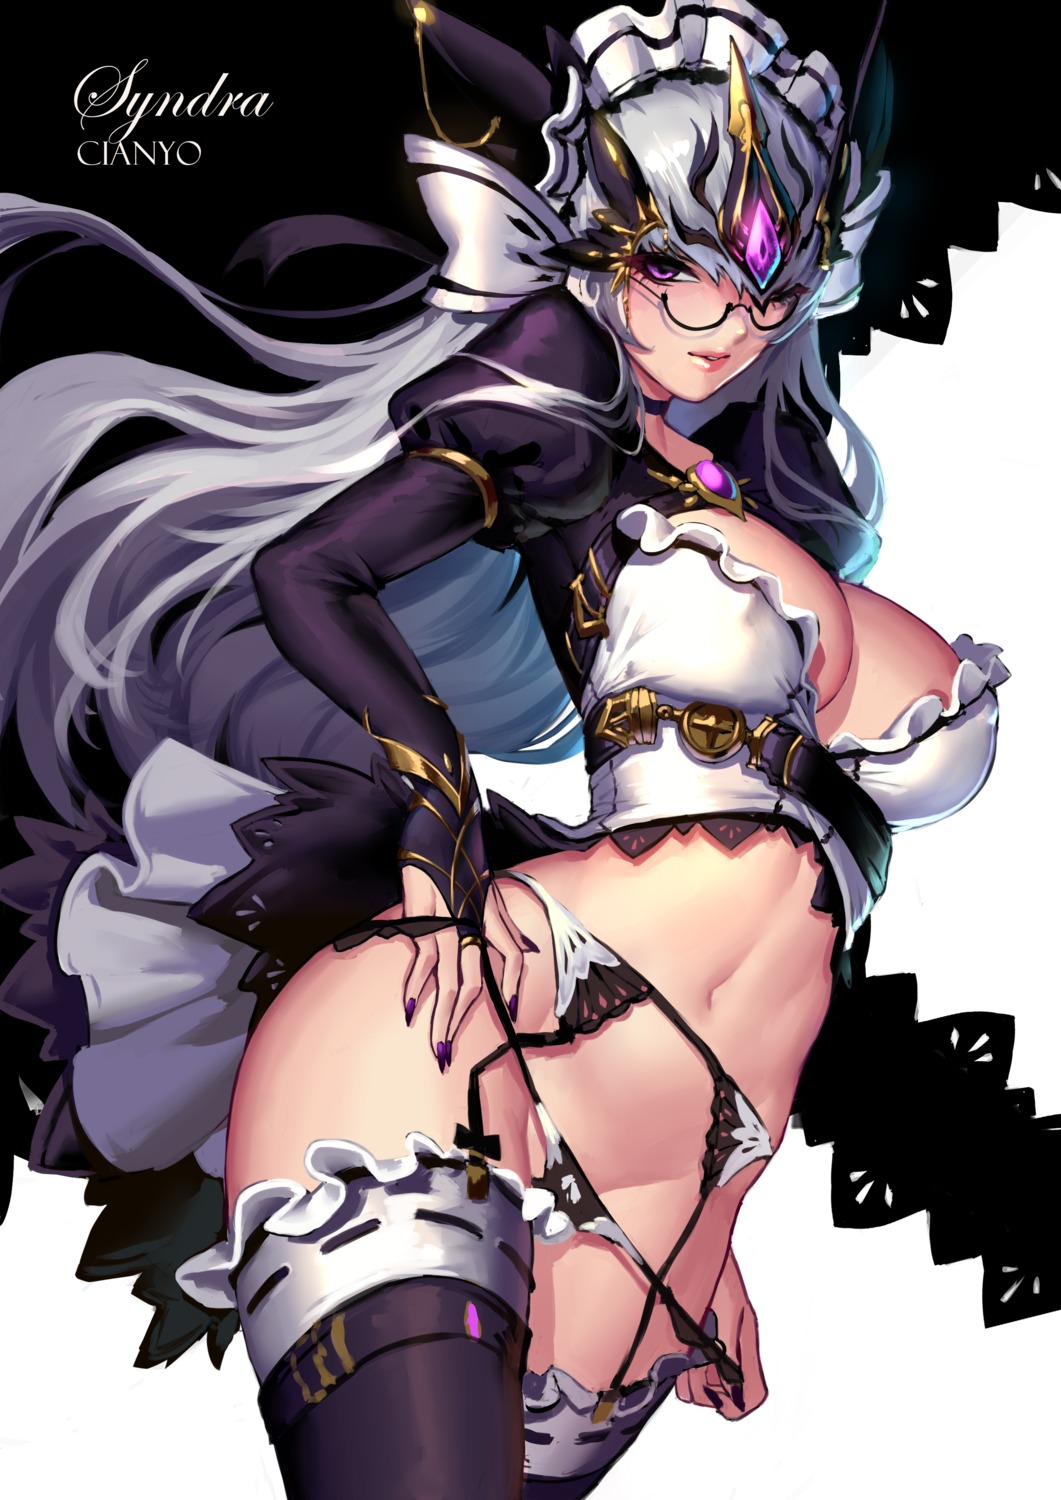 cianyo cleavage erect_nipples garter_belt league_of_legends megane pantsu panty_pull stockings syndra thighhighs undressing